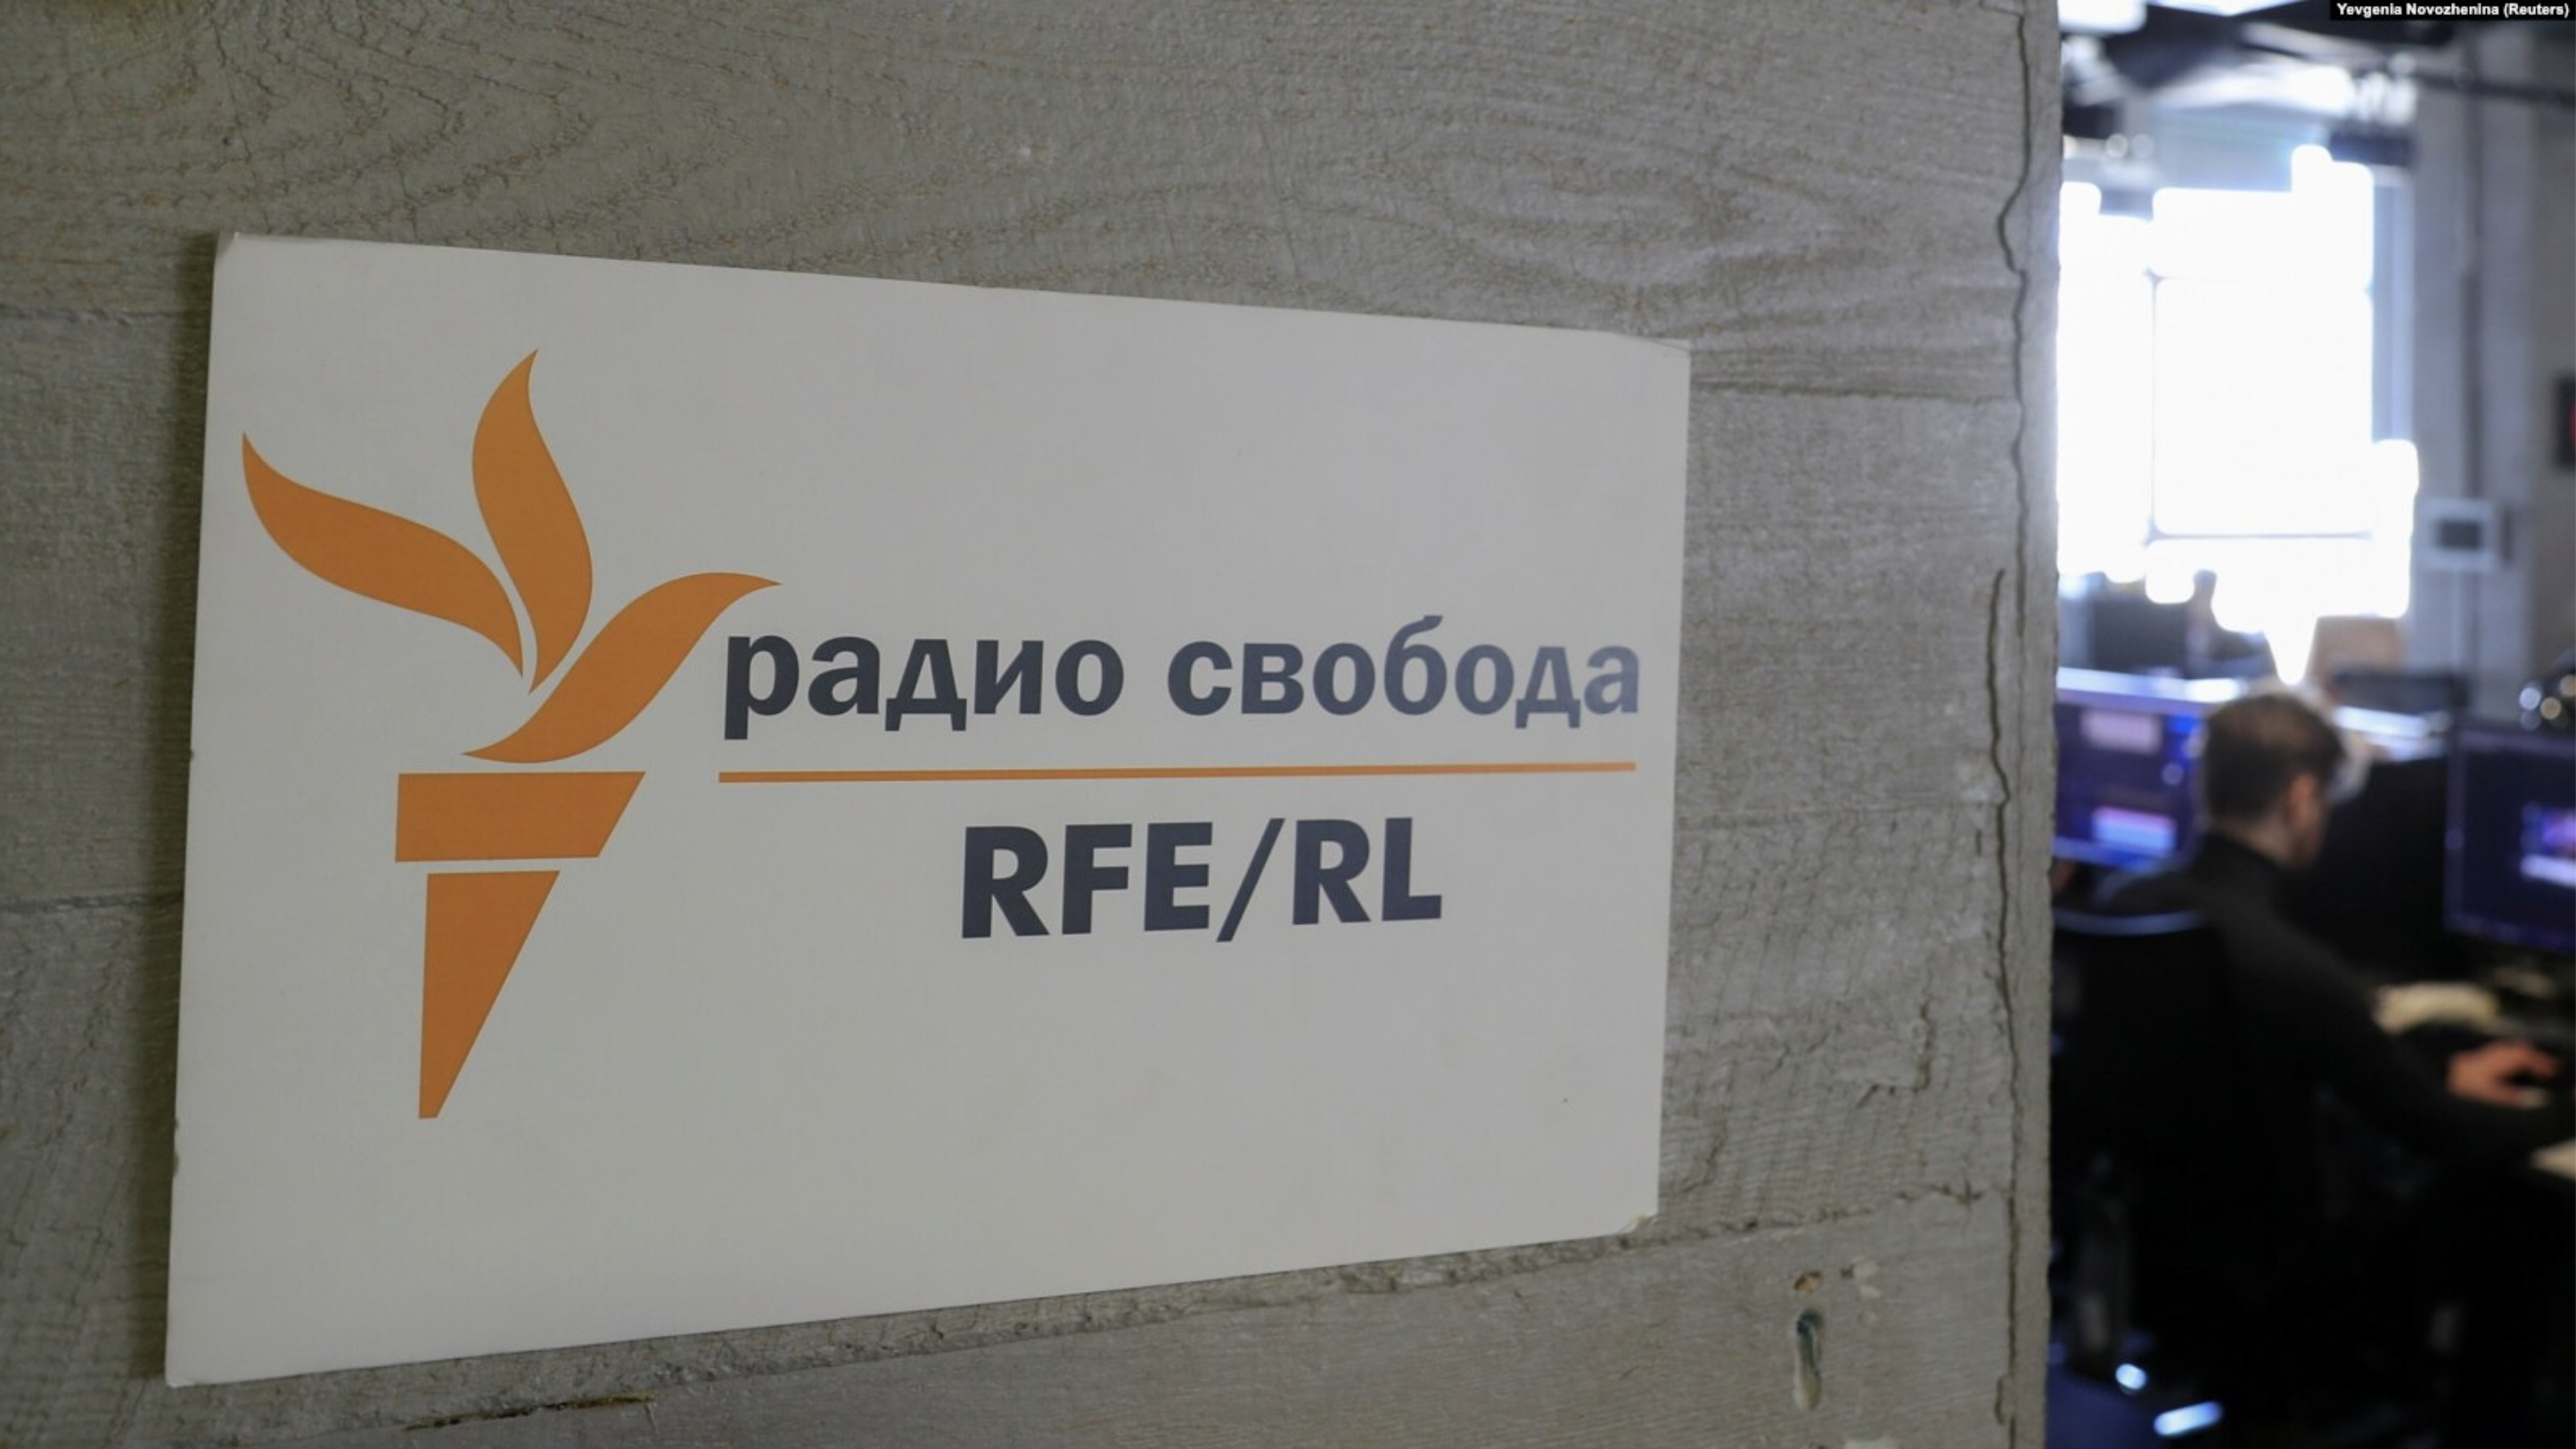 Despite Website blockages, Russians and Ukrainians turn to RFE/RL for war coverage